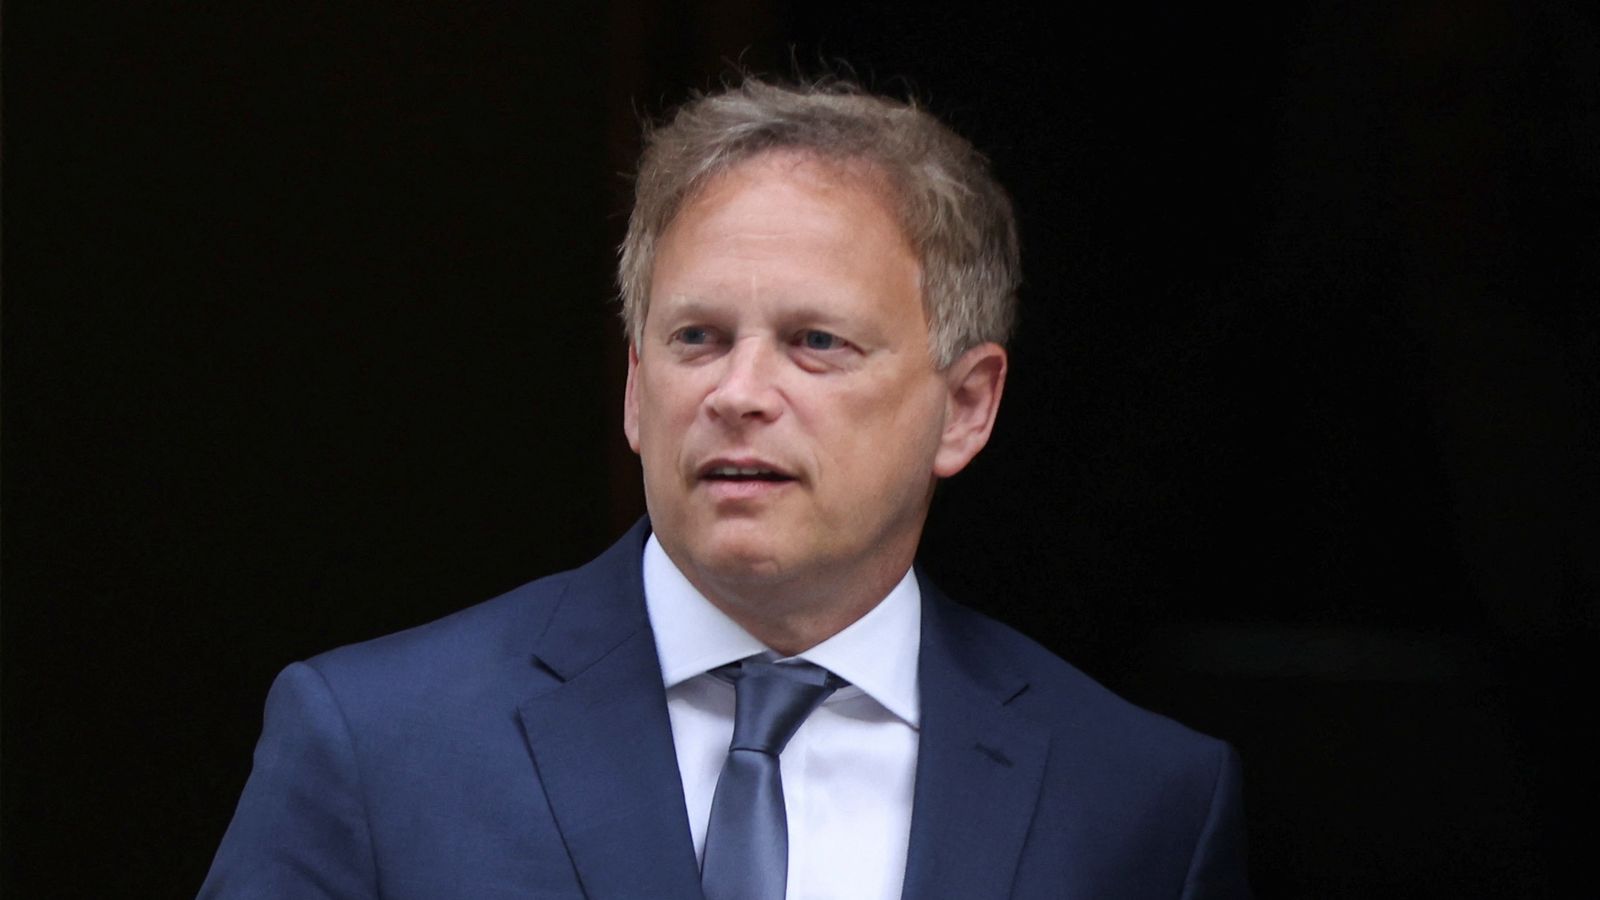 Grant Shapps defends new role as defence sec - but admits he lacks knowledge about Army